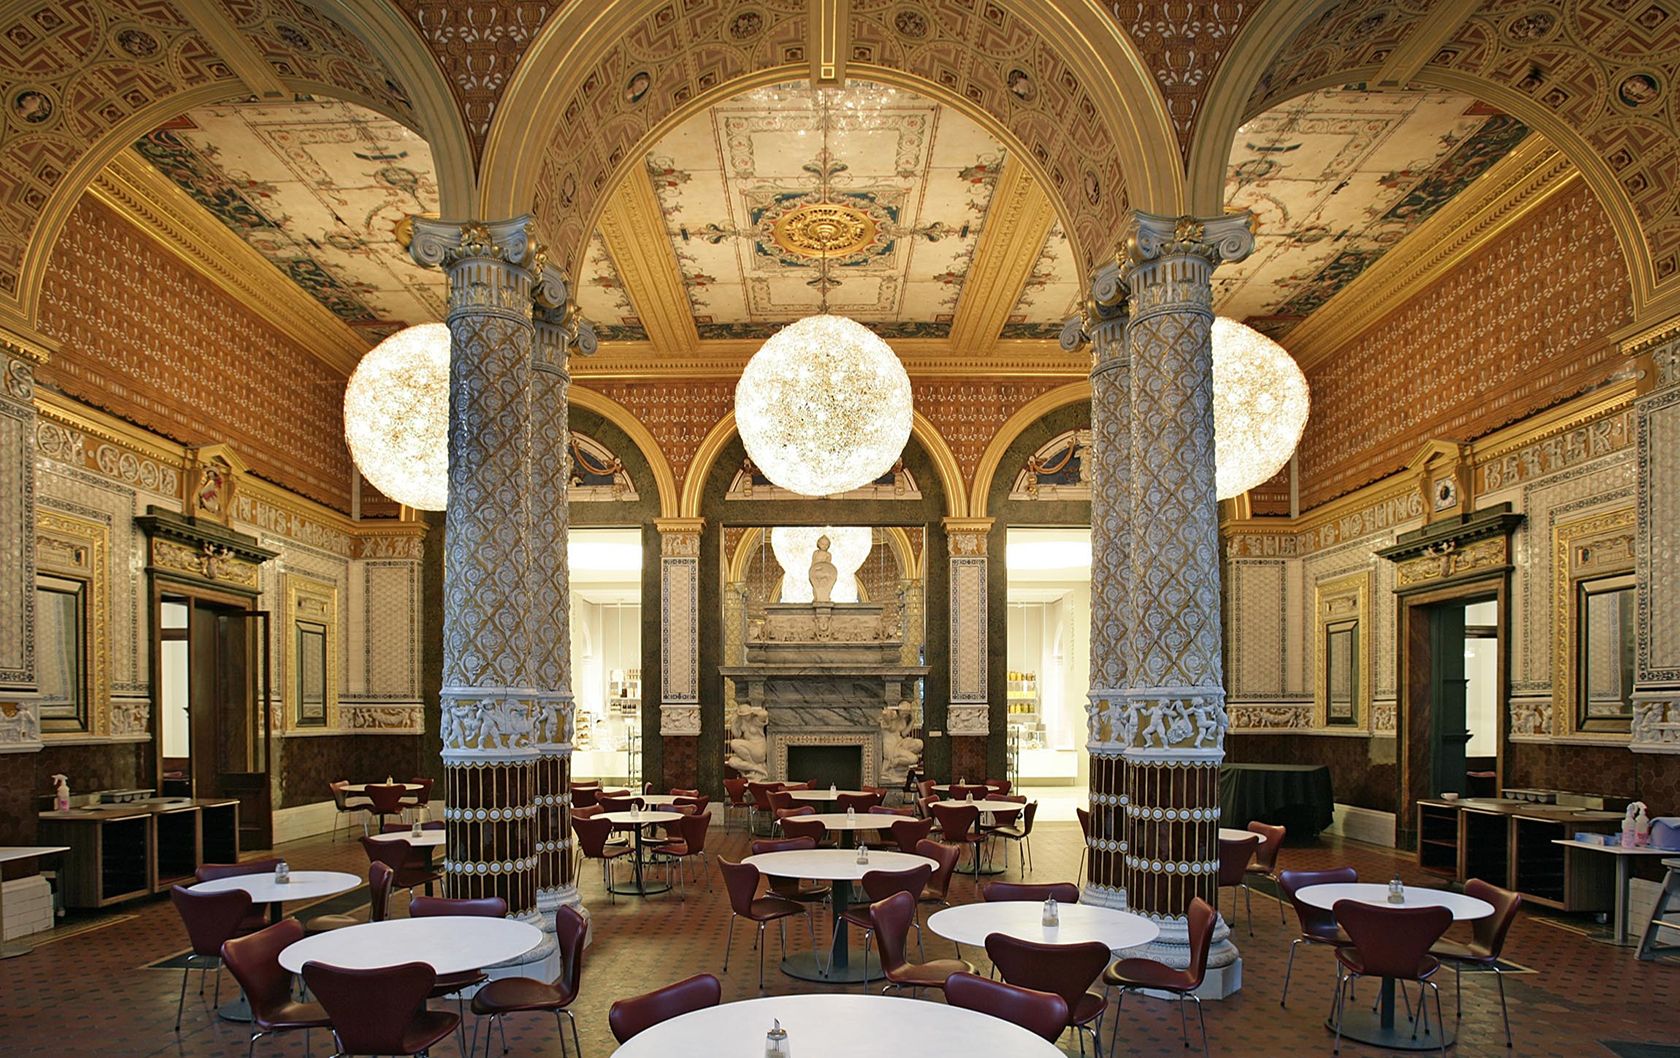 The Gamble Room at the V&A museum cafe